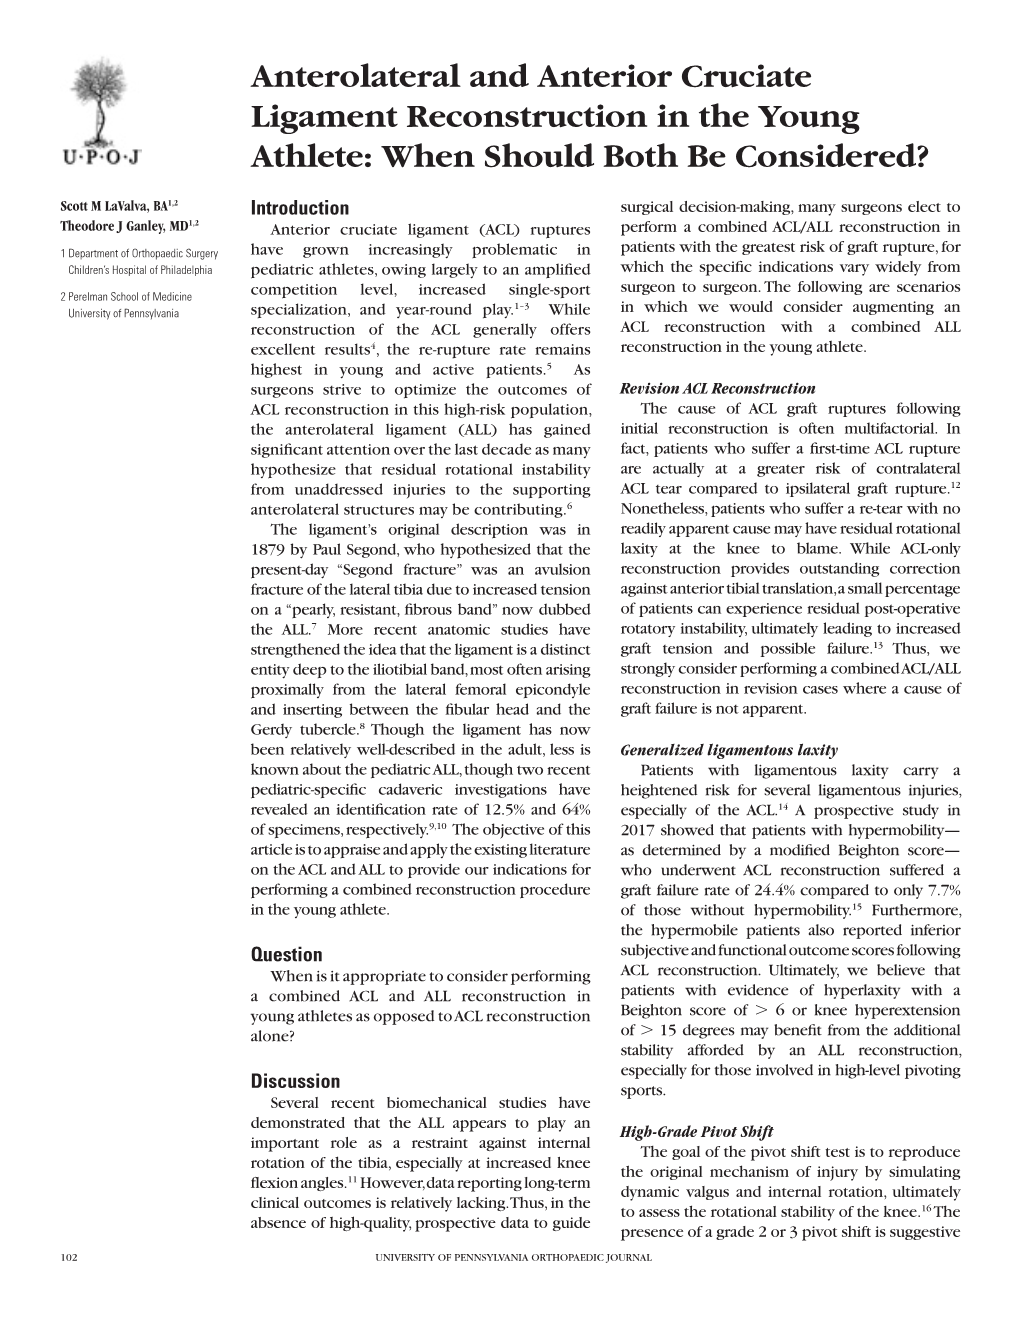 Anterolateral and Anterior Cruciate Ligament Reconstruction in the Young Athlete: When Should Both Be Considered?